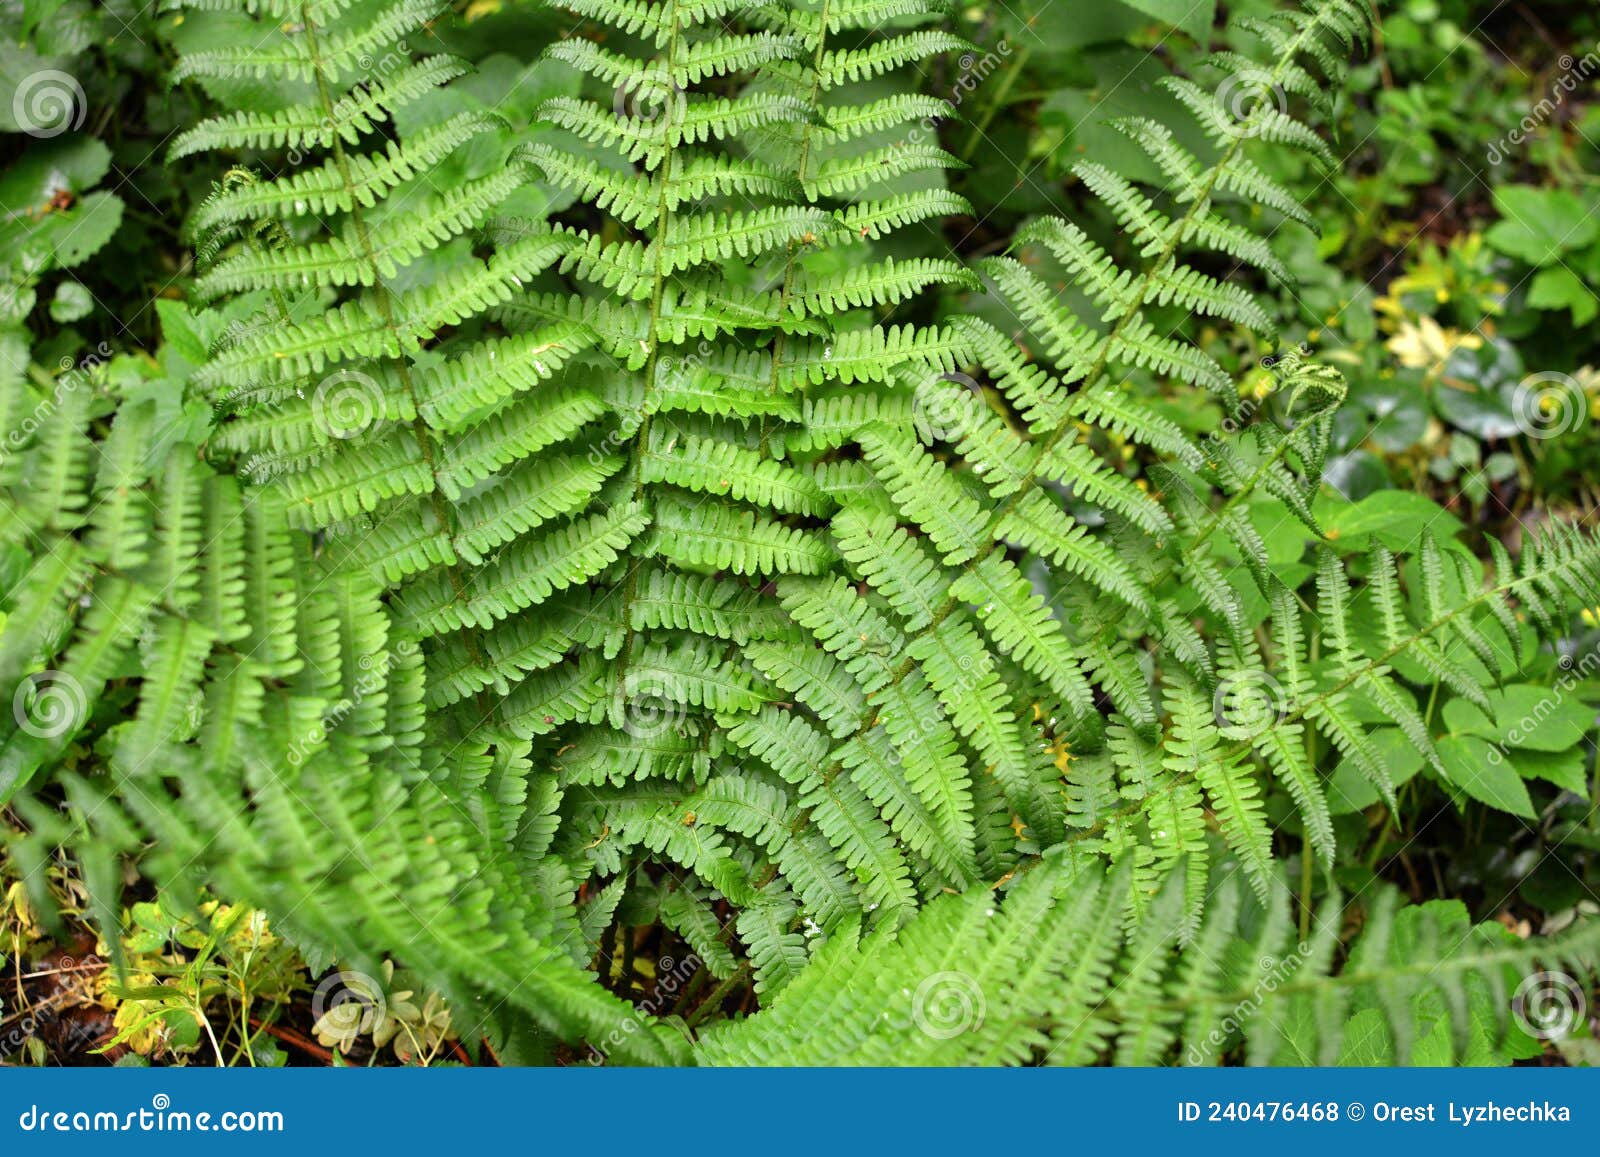 fern dryopteris filix-mas grows in the forest